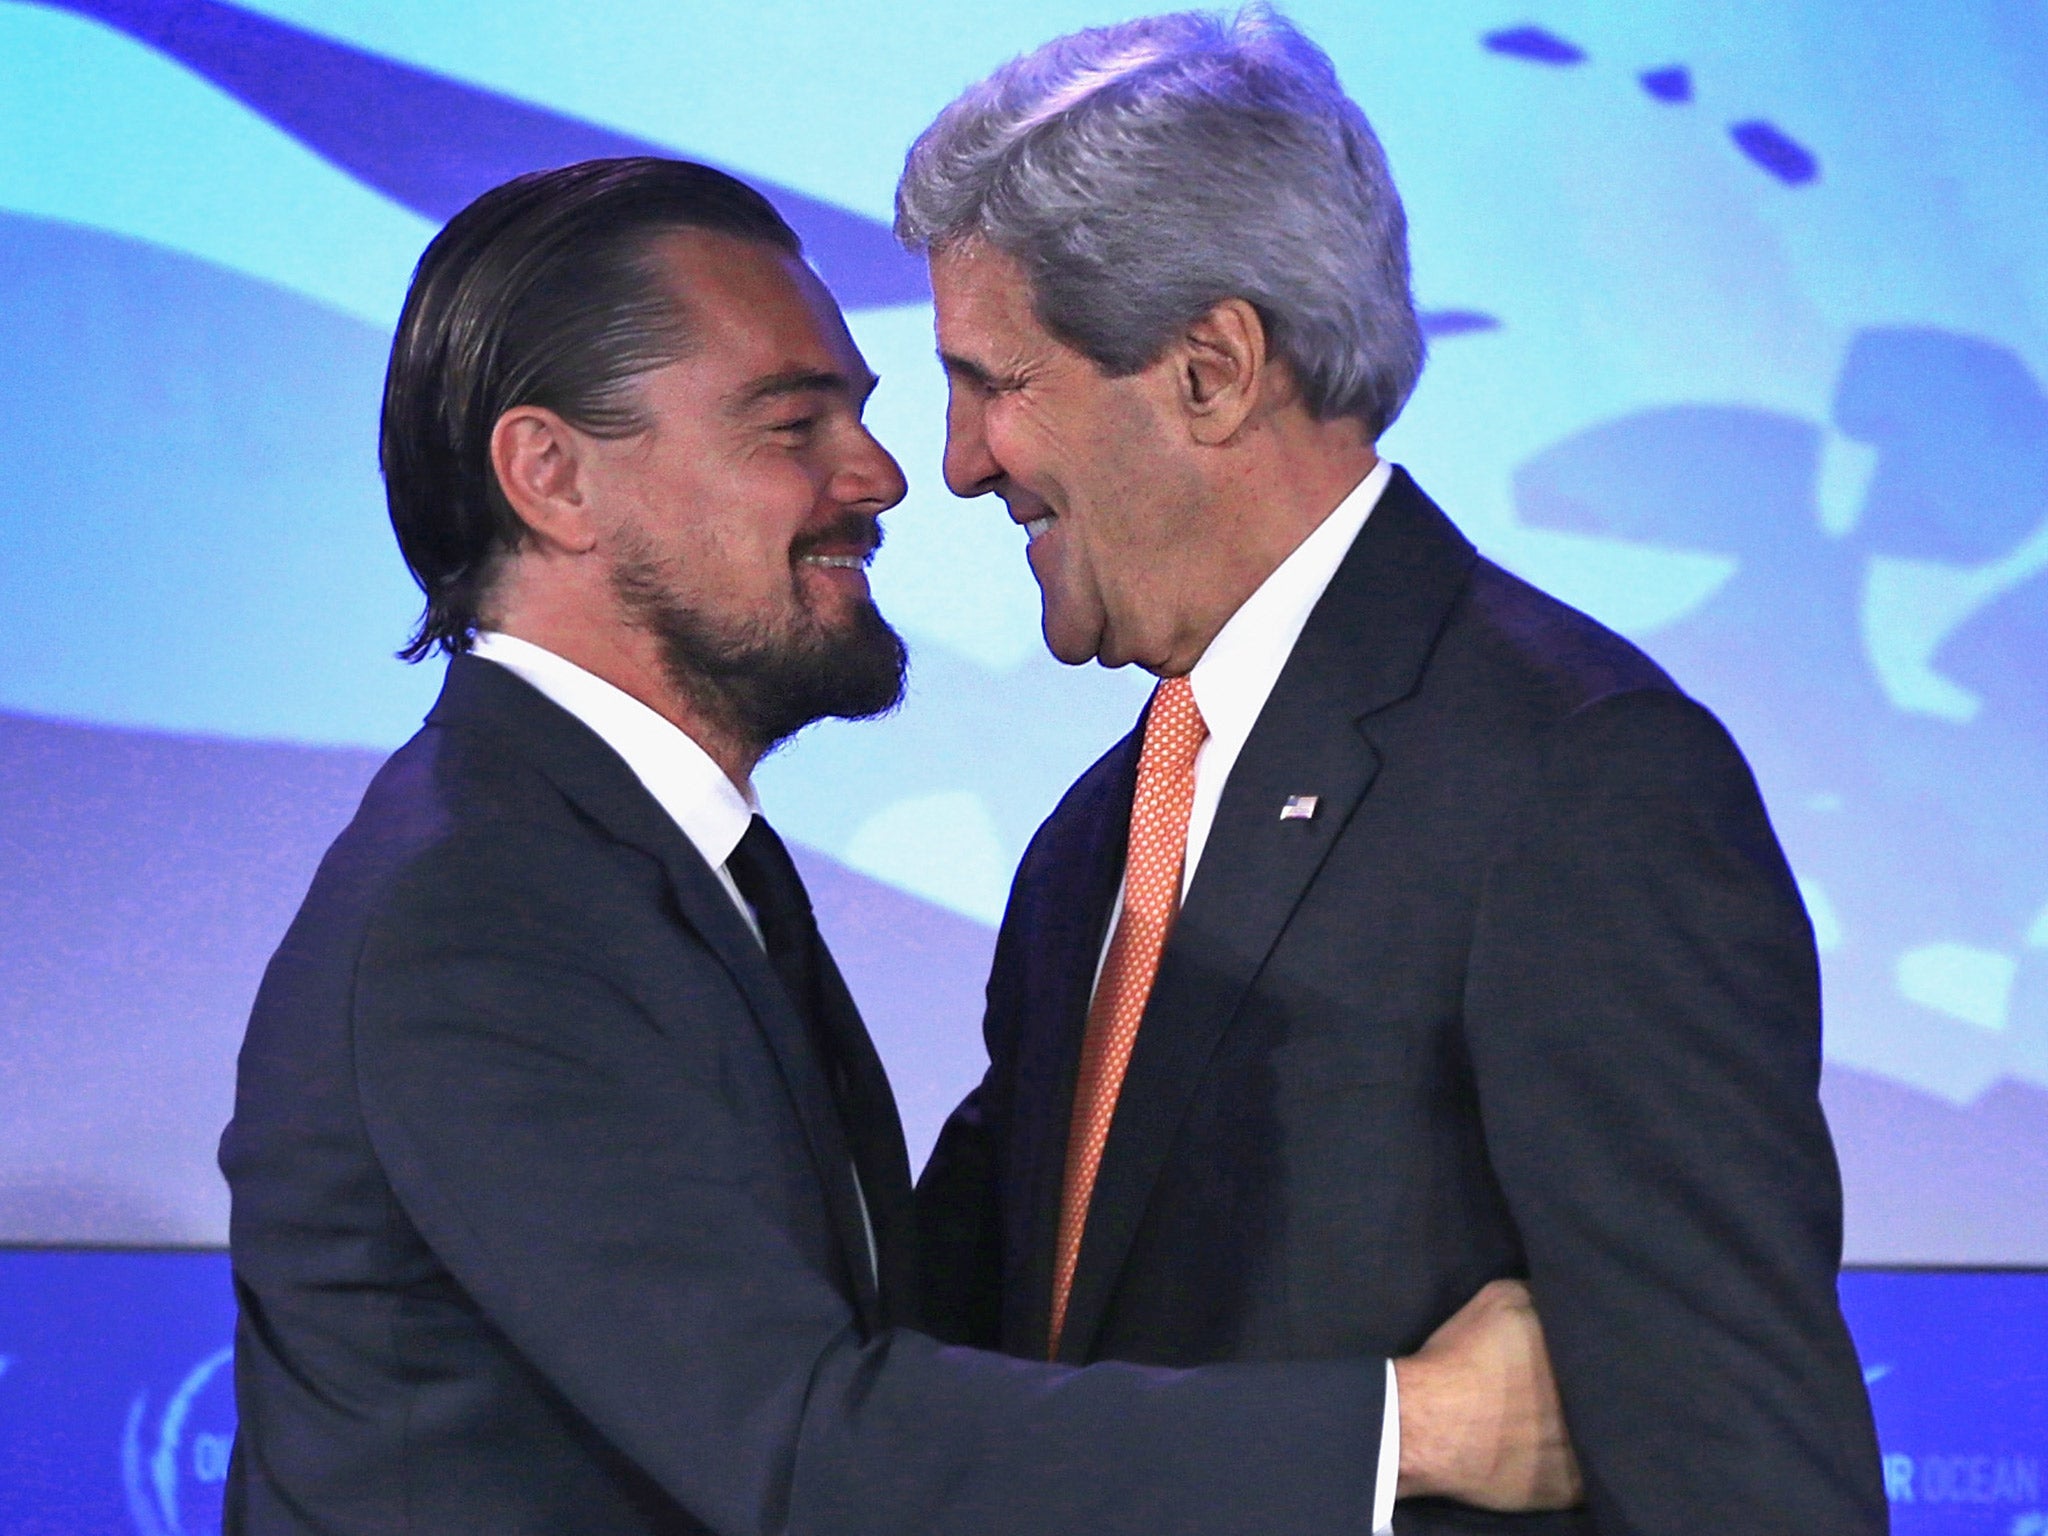 US Secretary of State John Kerry, right, with Hollywood A-lister Leonardo DiCaprio in 2014